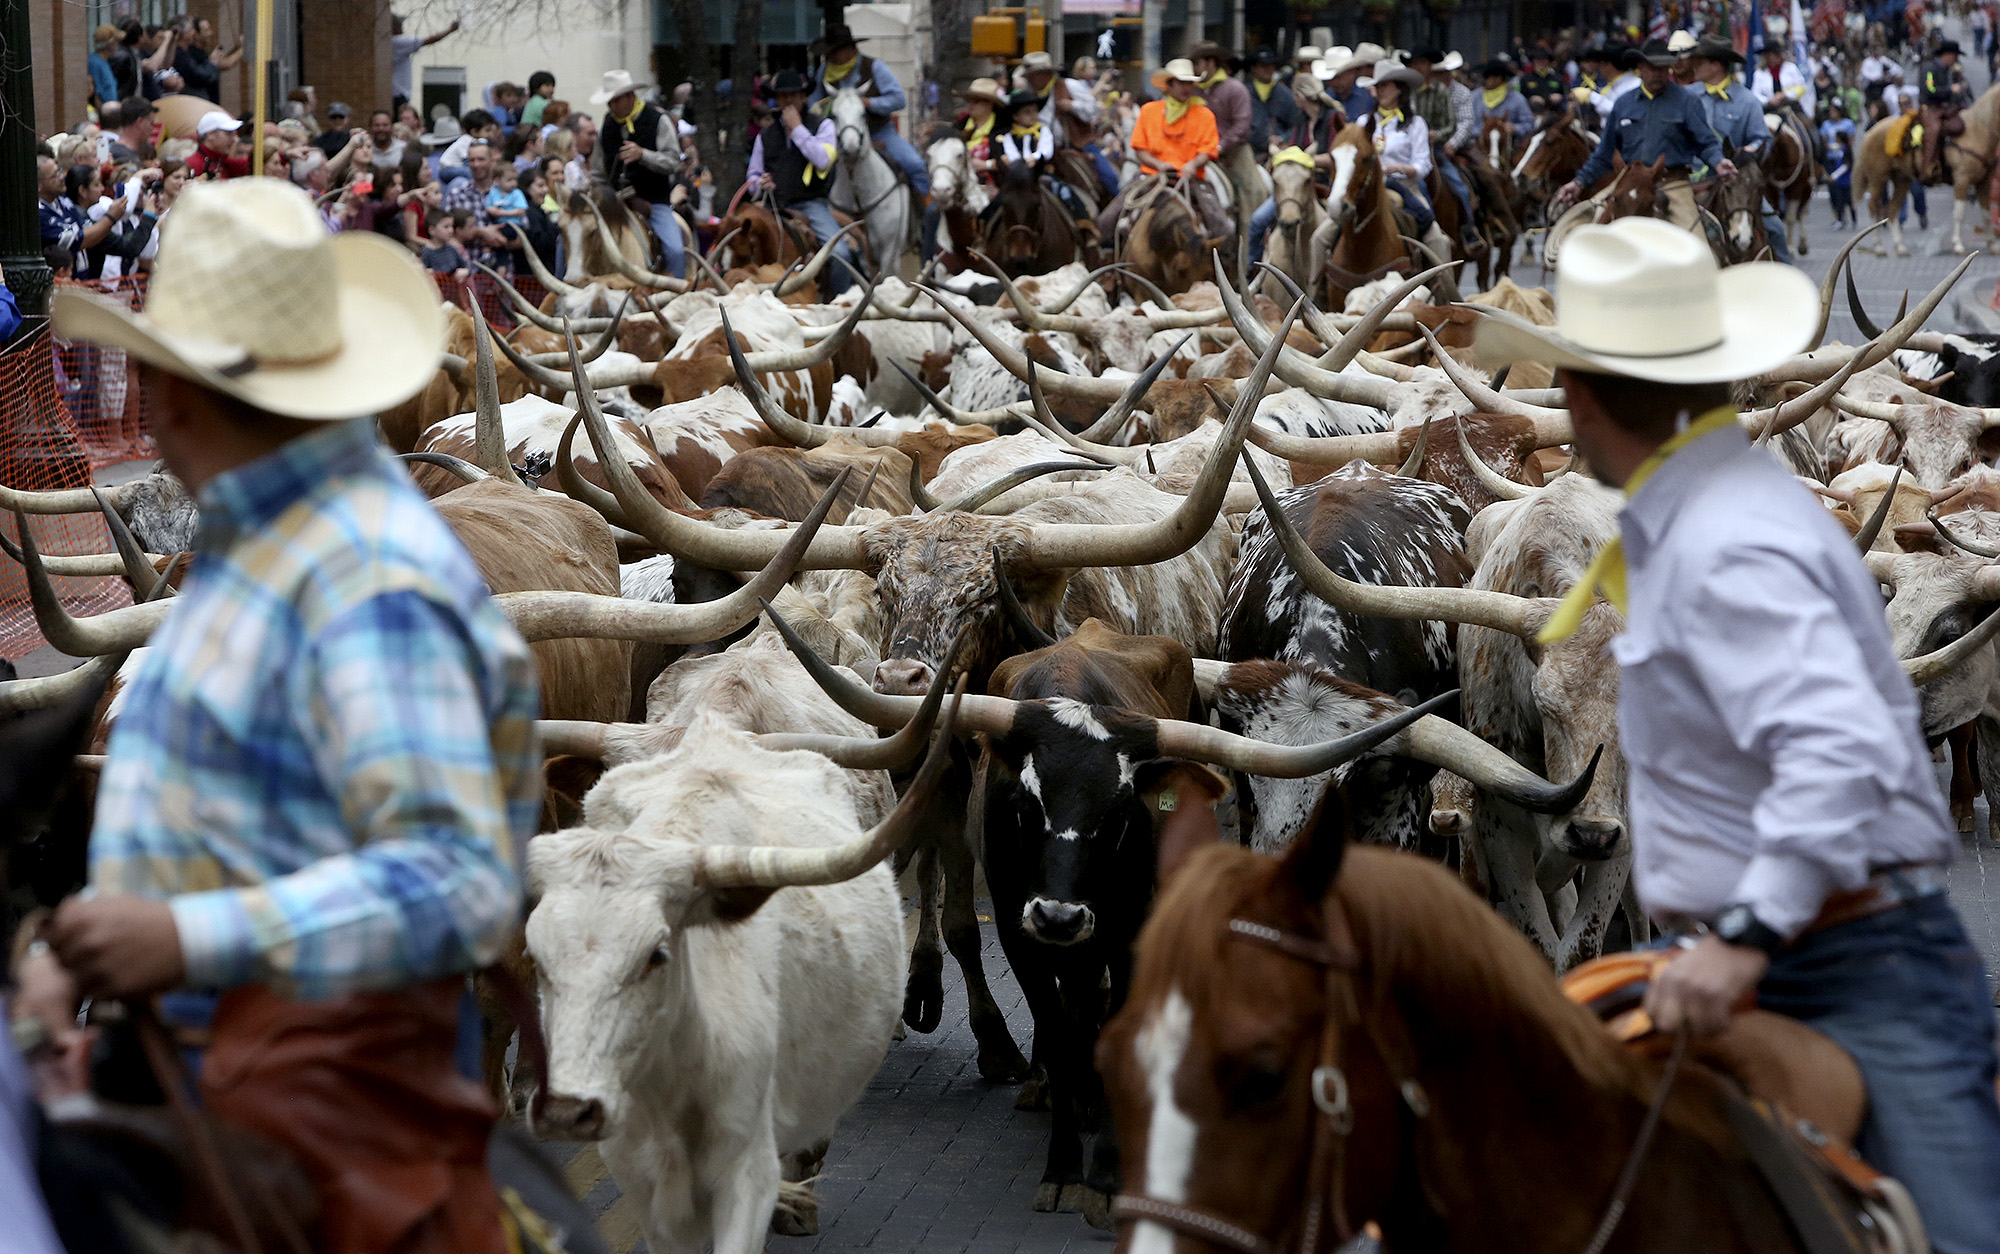 San Antonio was pulse of great cattle drives